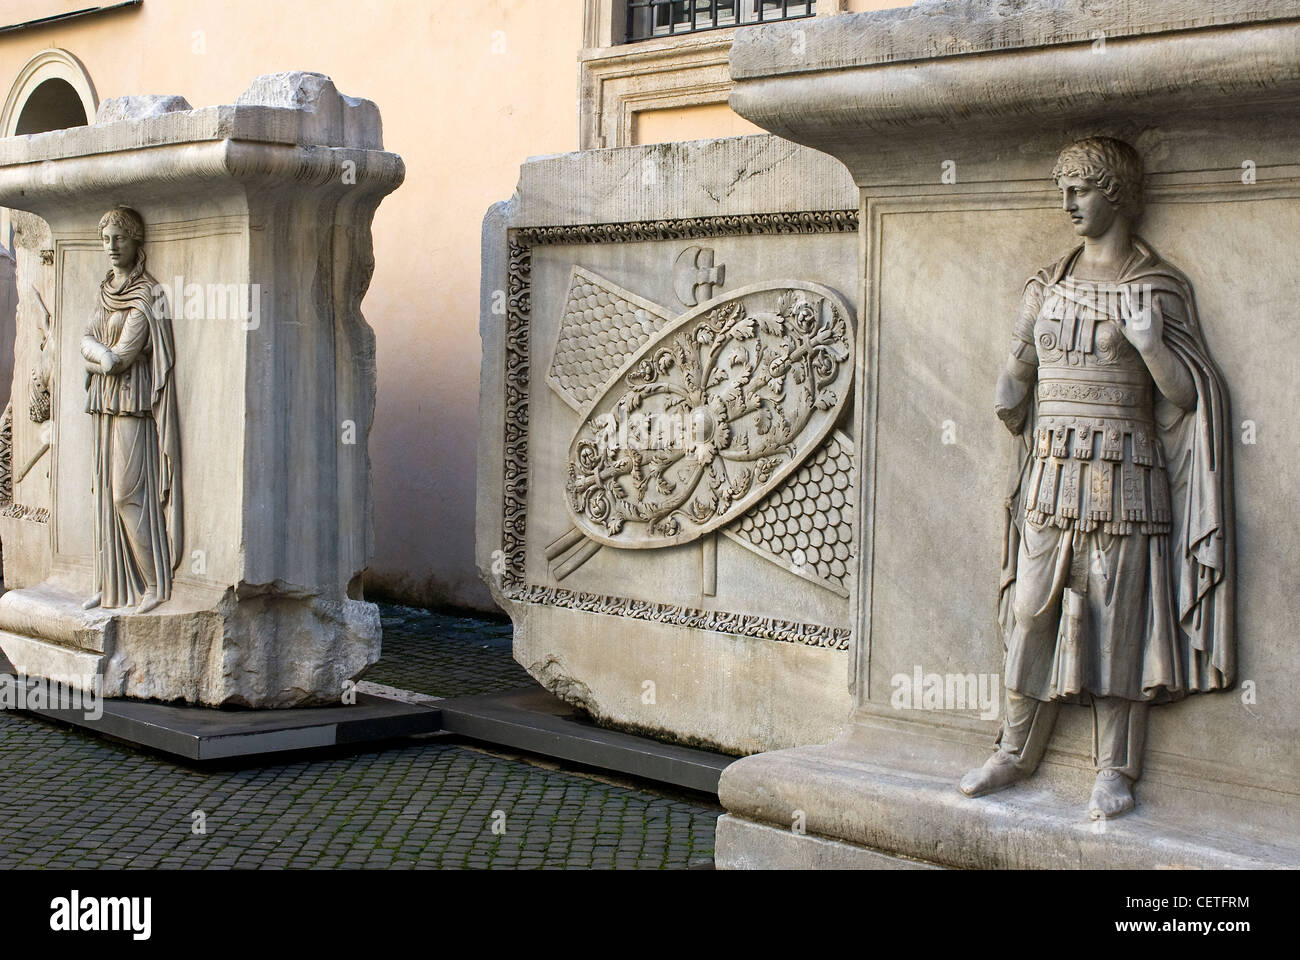 Plinths with personifications of Provinces and trophies of arms, courtyard of Palazzo dei Conservatori, Rome, Latium, Italy Stock Photo